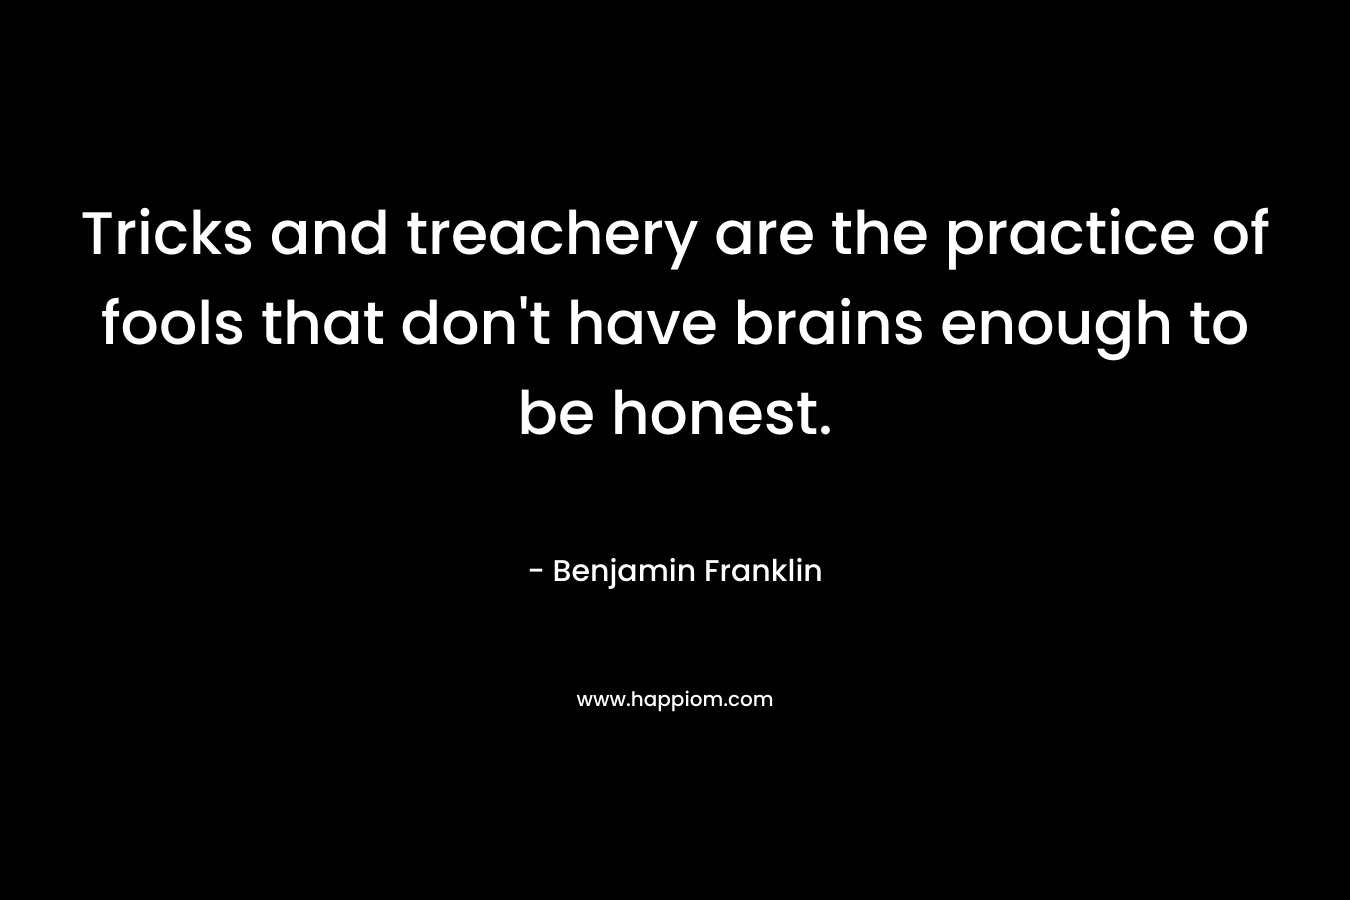 Tricks and treachery are the practice of fools that don't have brains enough to be honest.